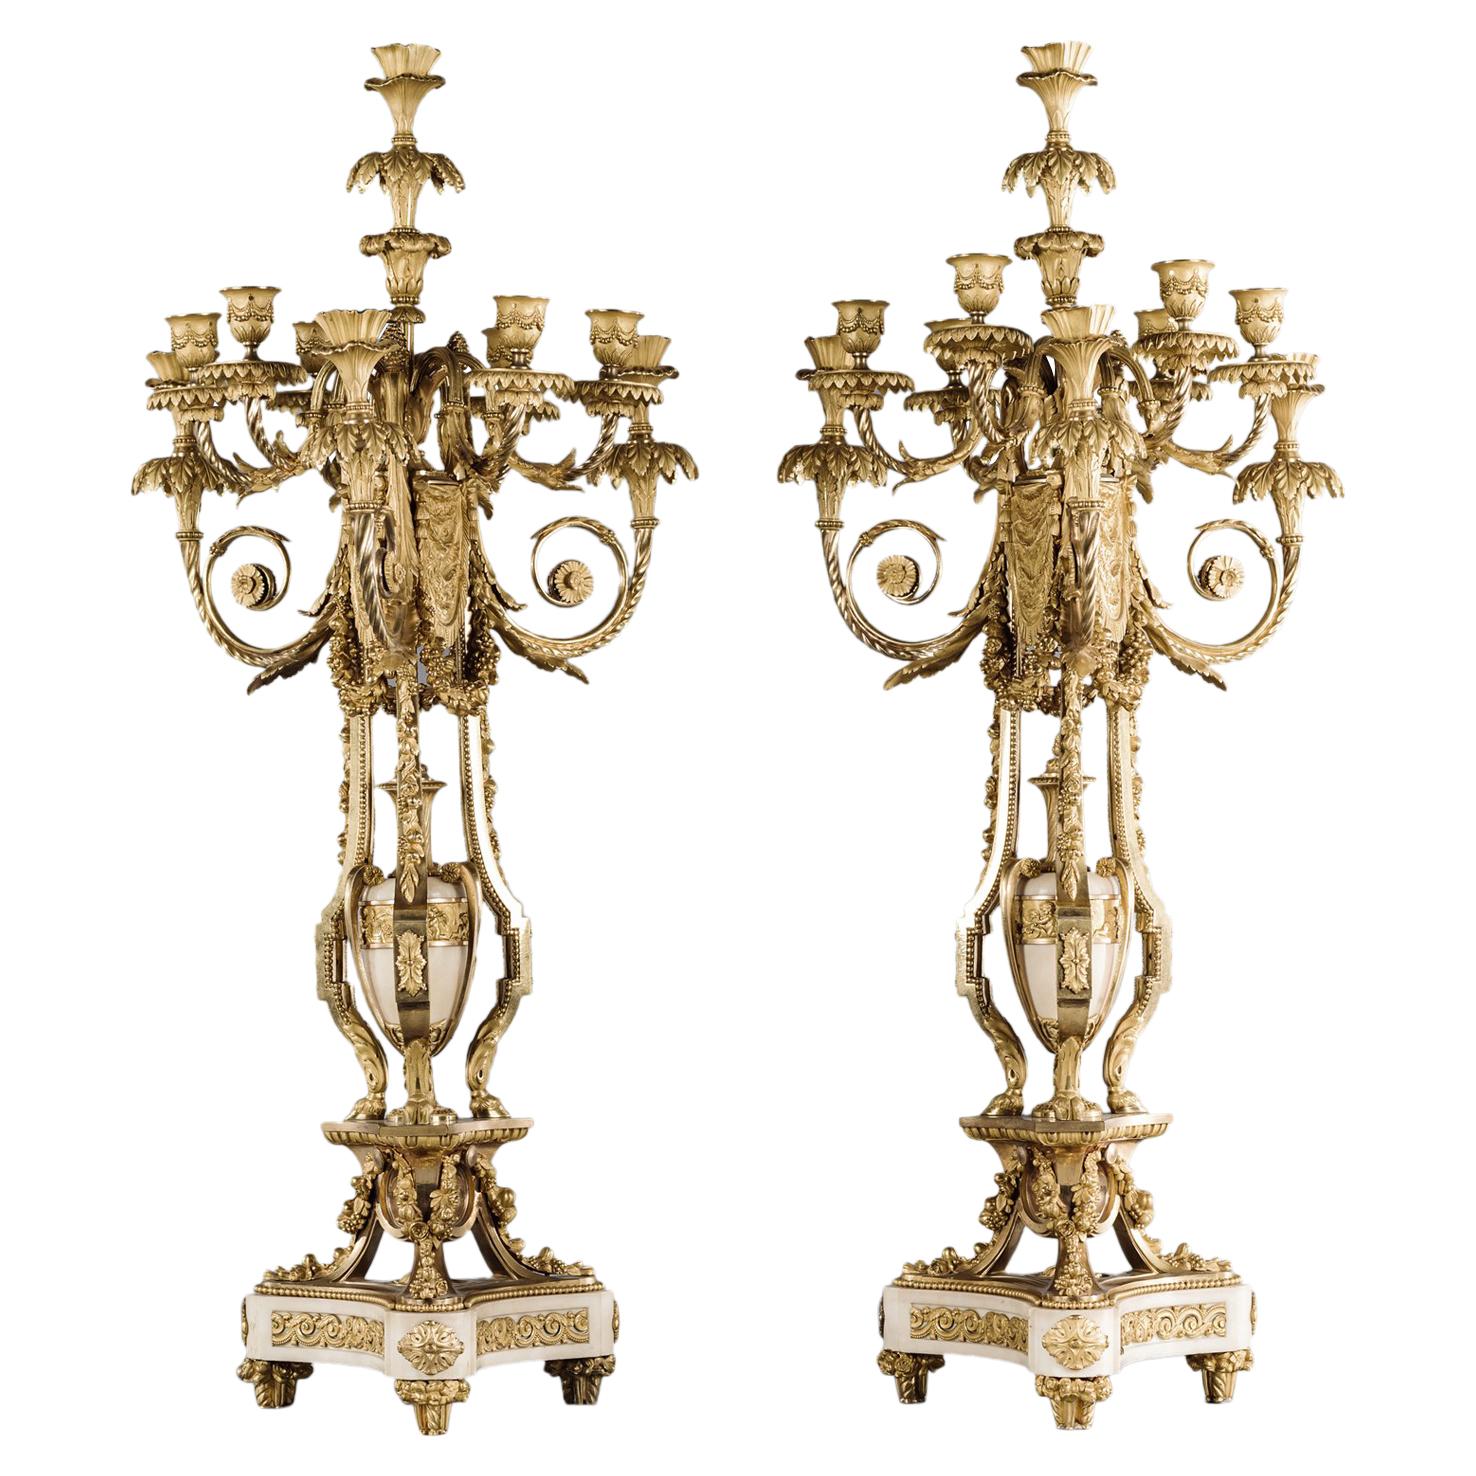 Pair Of Ten-Light Candelabra After Pierre Gouthière, by Henri Picard, Circa 1870 For Sale